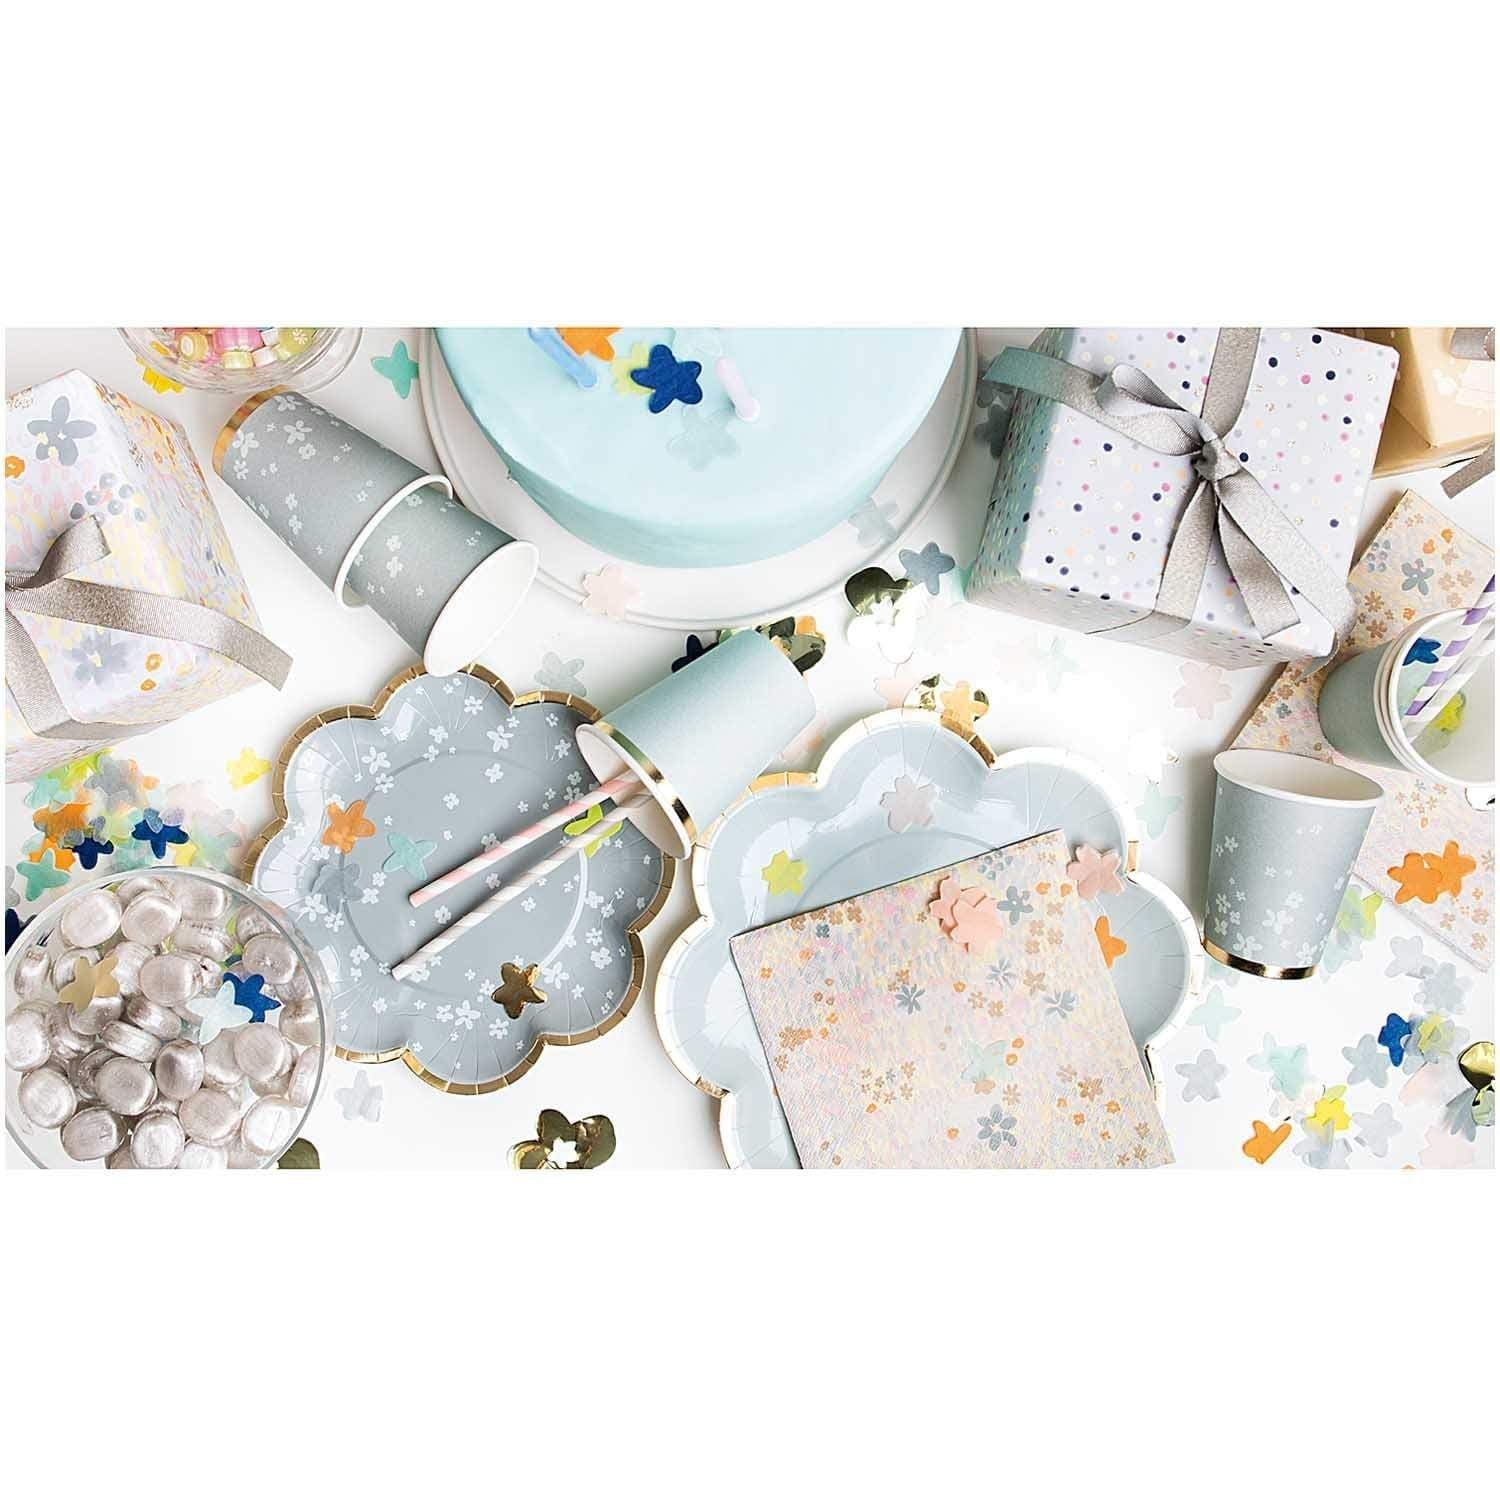 Flower shaped Confetti | Blue Party Confetti  | Pretty Little Party  YEY! Lets Party